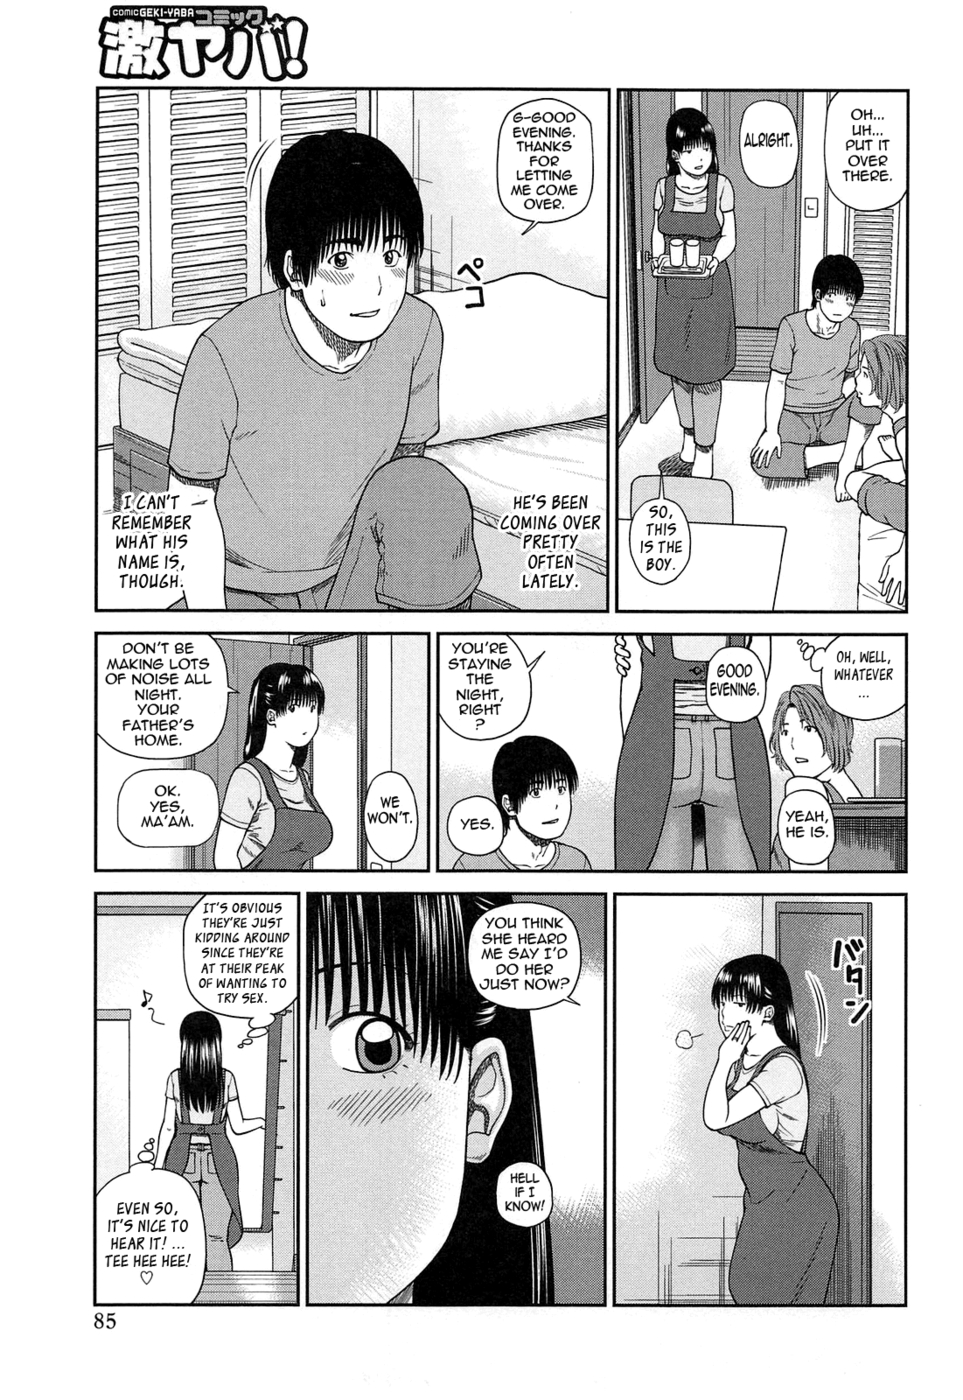 Hentai Manga Comic-35 Year Old Ripe Wife-Chapter 5-The Night I Was Aroused By My Son's Friend (First Half)-3